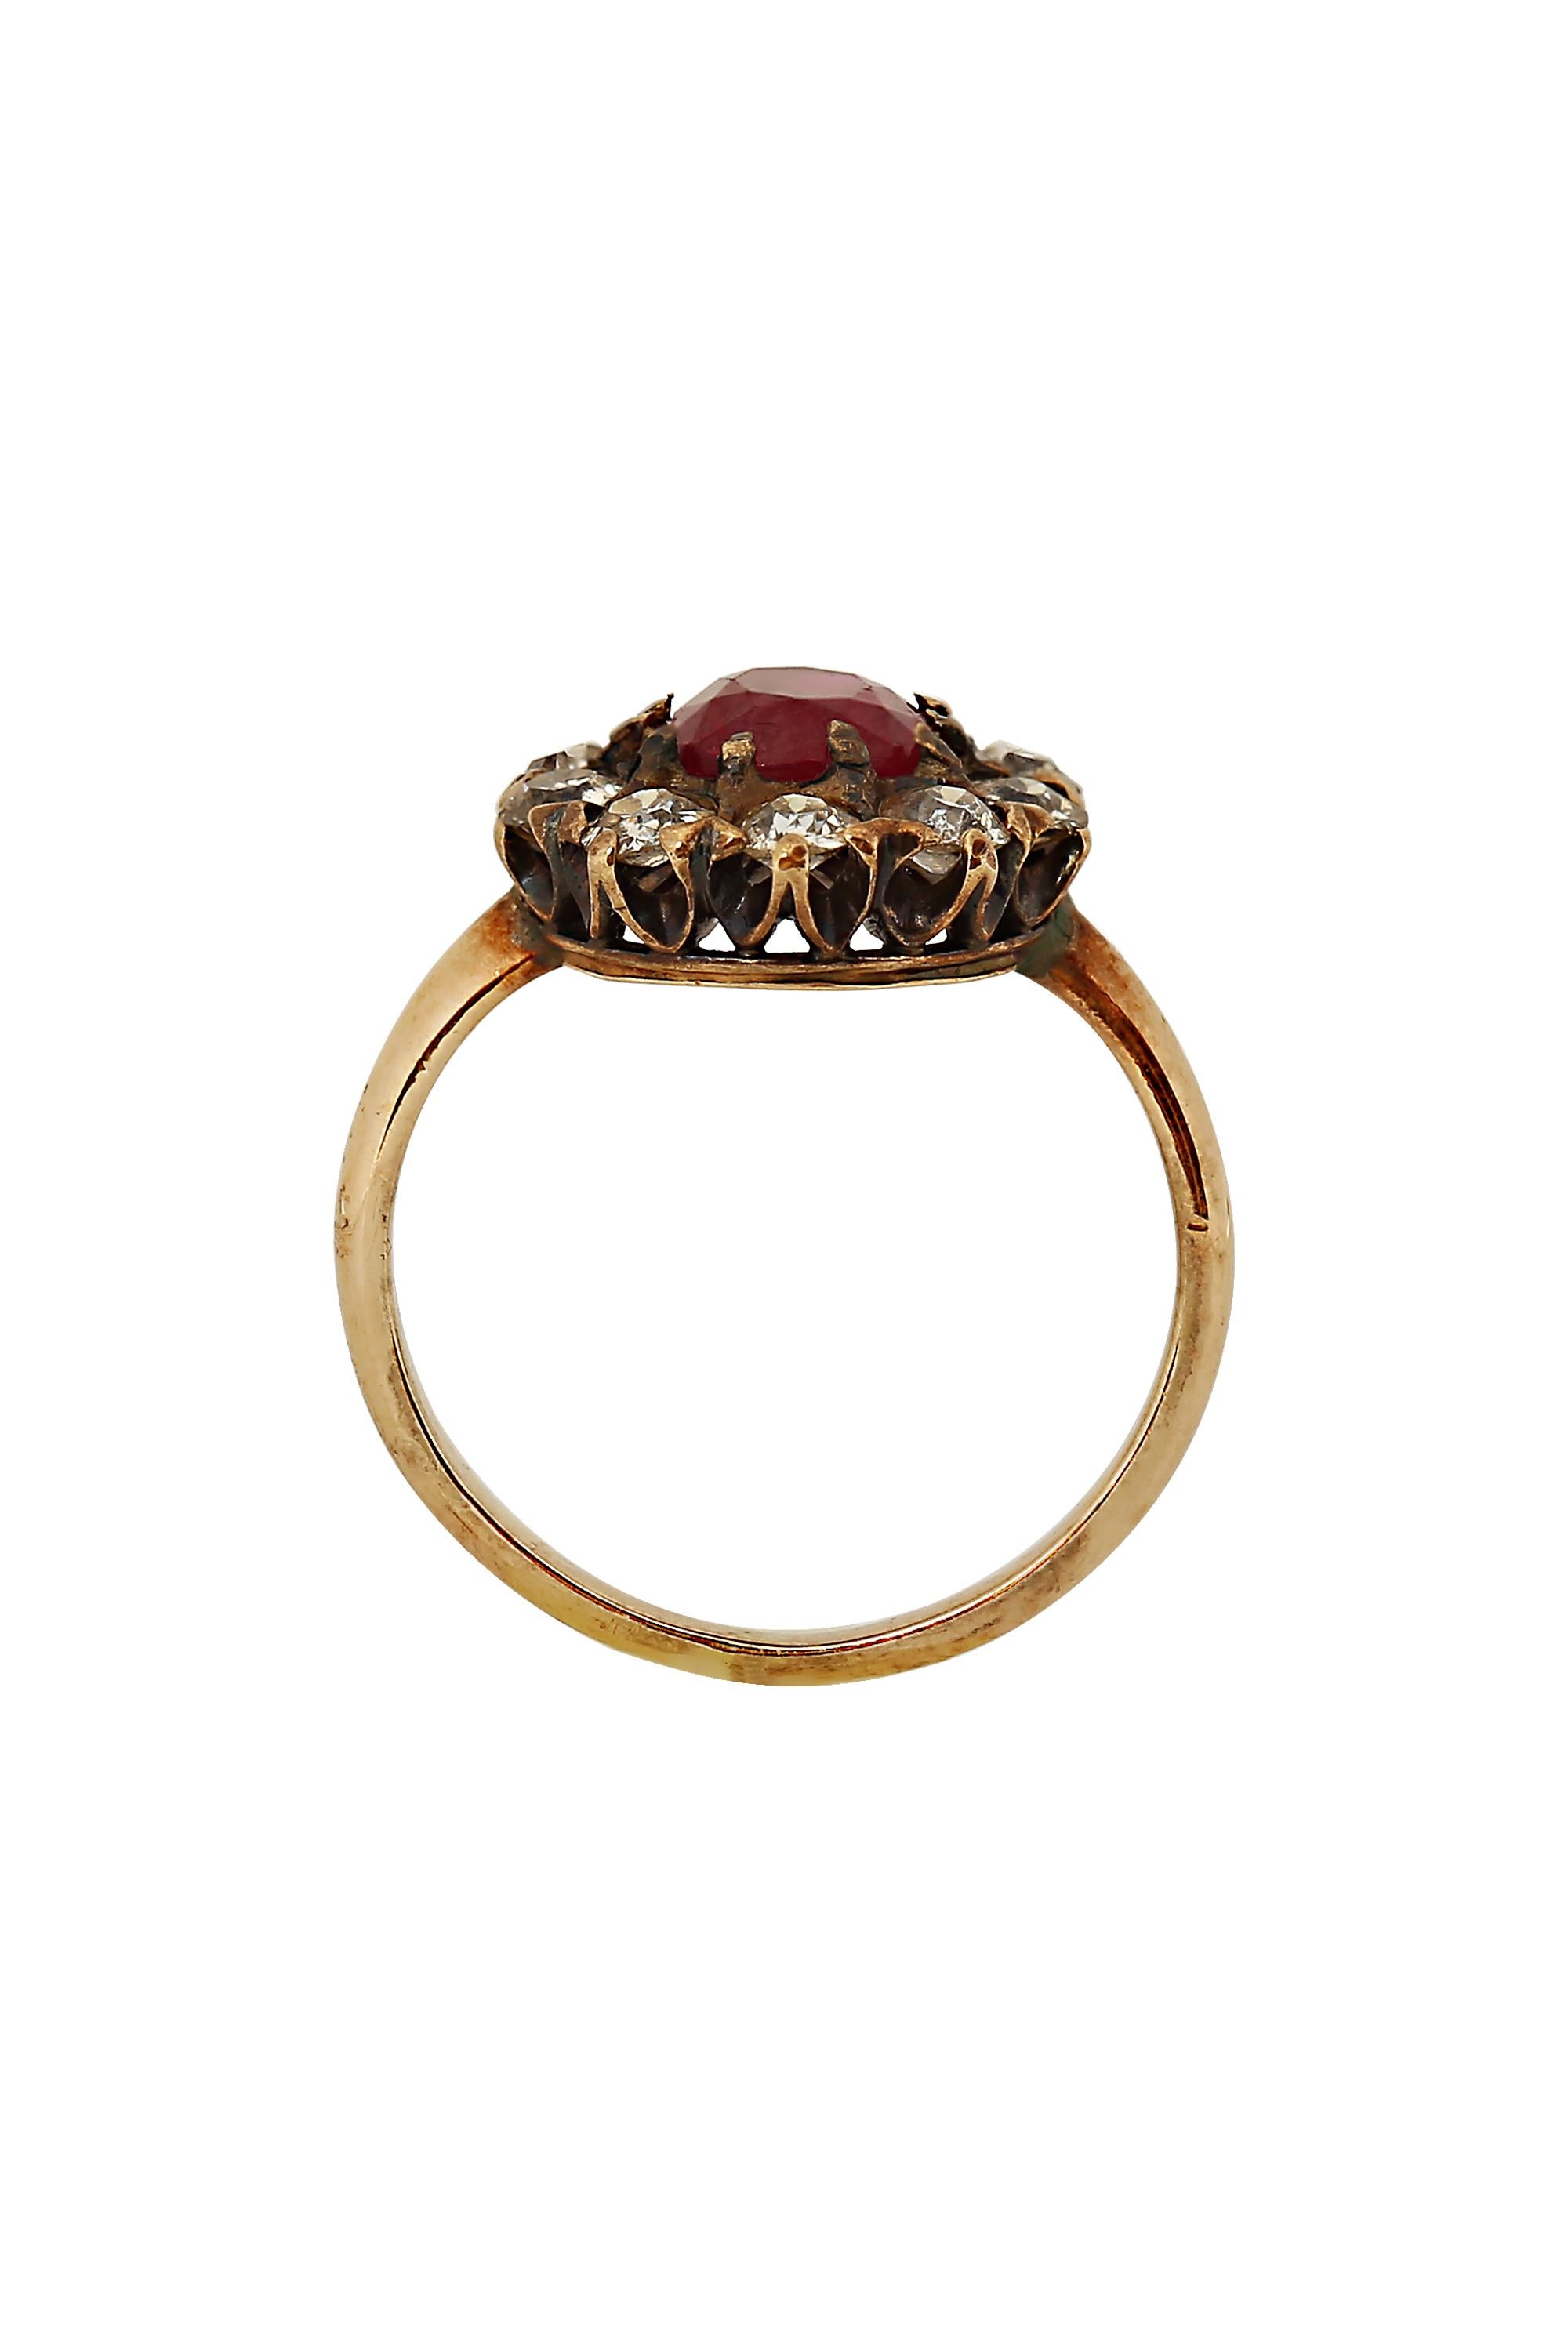 A romantic classic, this ring centers a rich red ruby glowing from within a fame of sparkling Old European cut diamonds in a hand fabricated 10 karat yellow gold mounting. Set with ten Old European cut diamonds weighing approximately 1.30 carats and